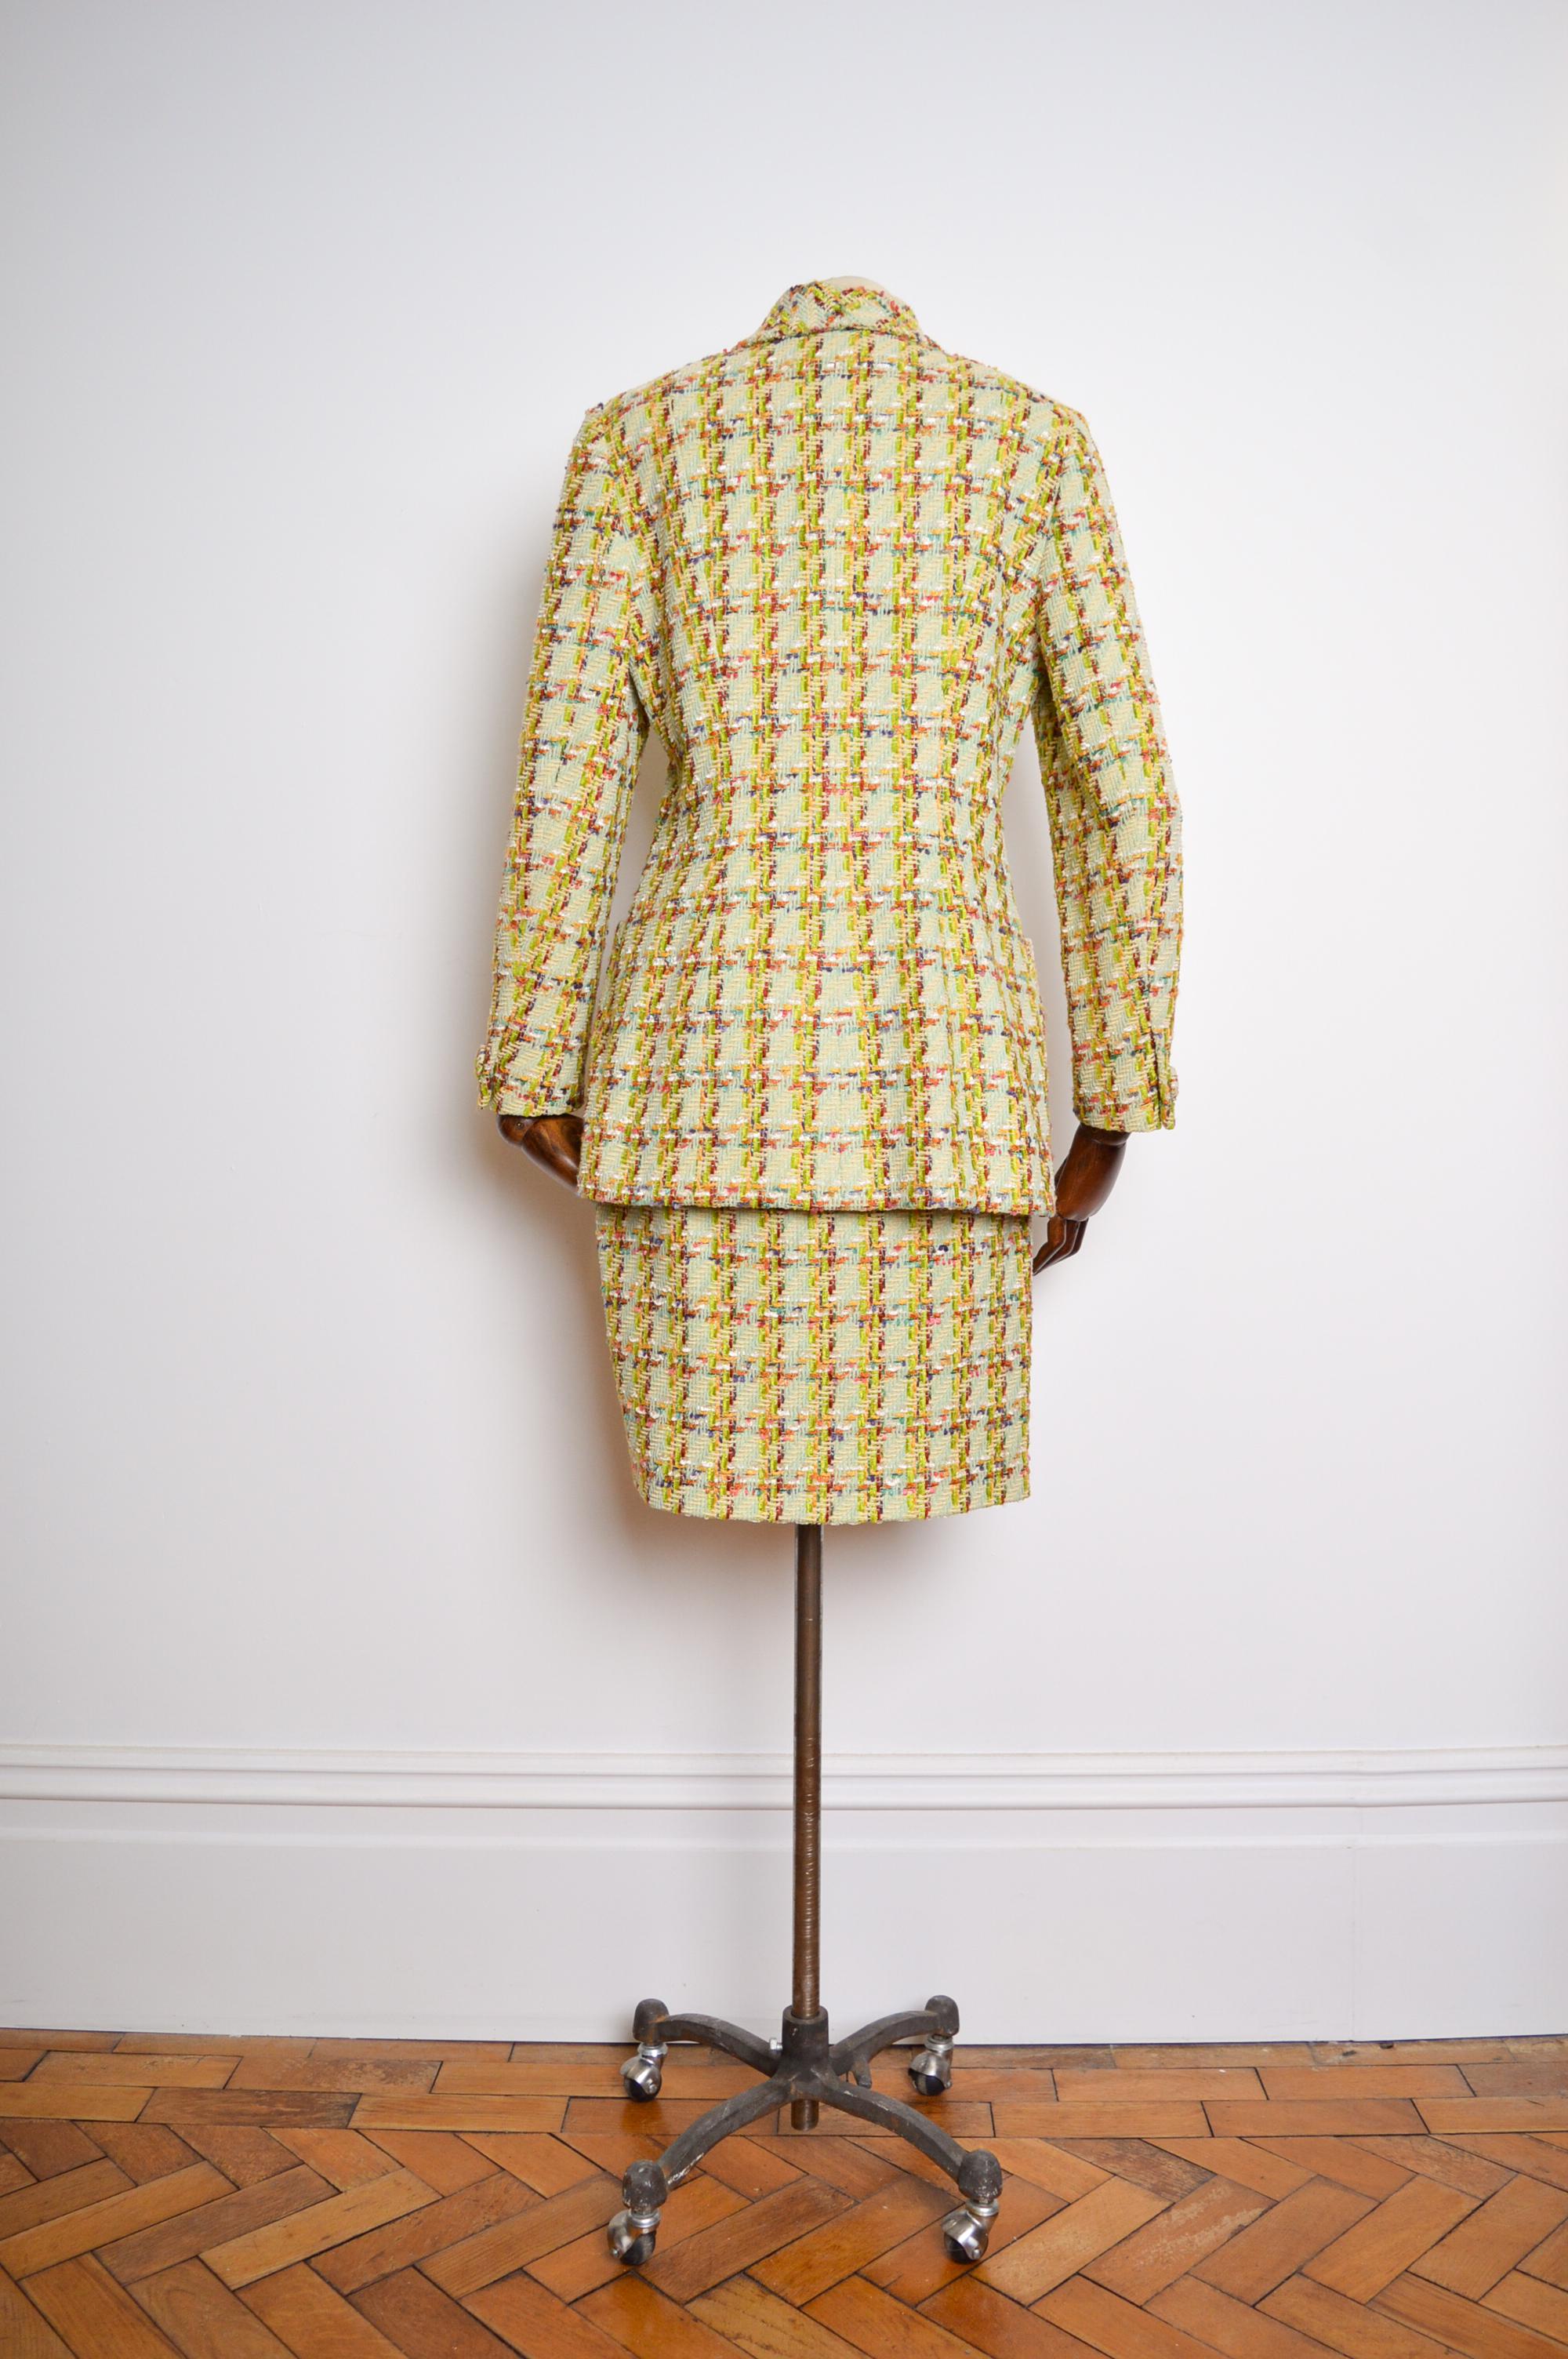 S/S 1993 ROCHAS Jewel Tone Lime Green Tweed Boucle Jacket & Skirt Matching Set For Sale 10